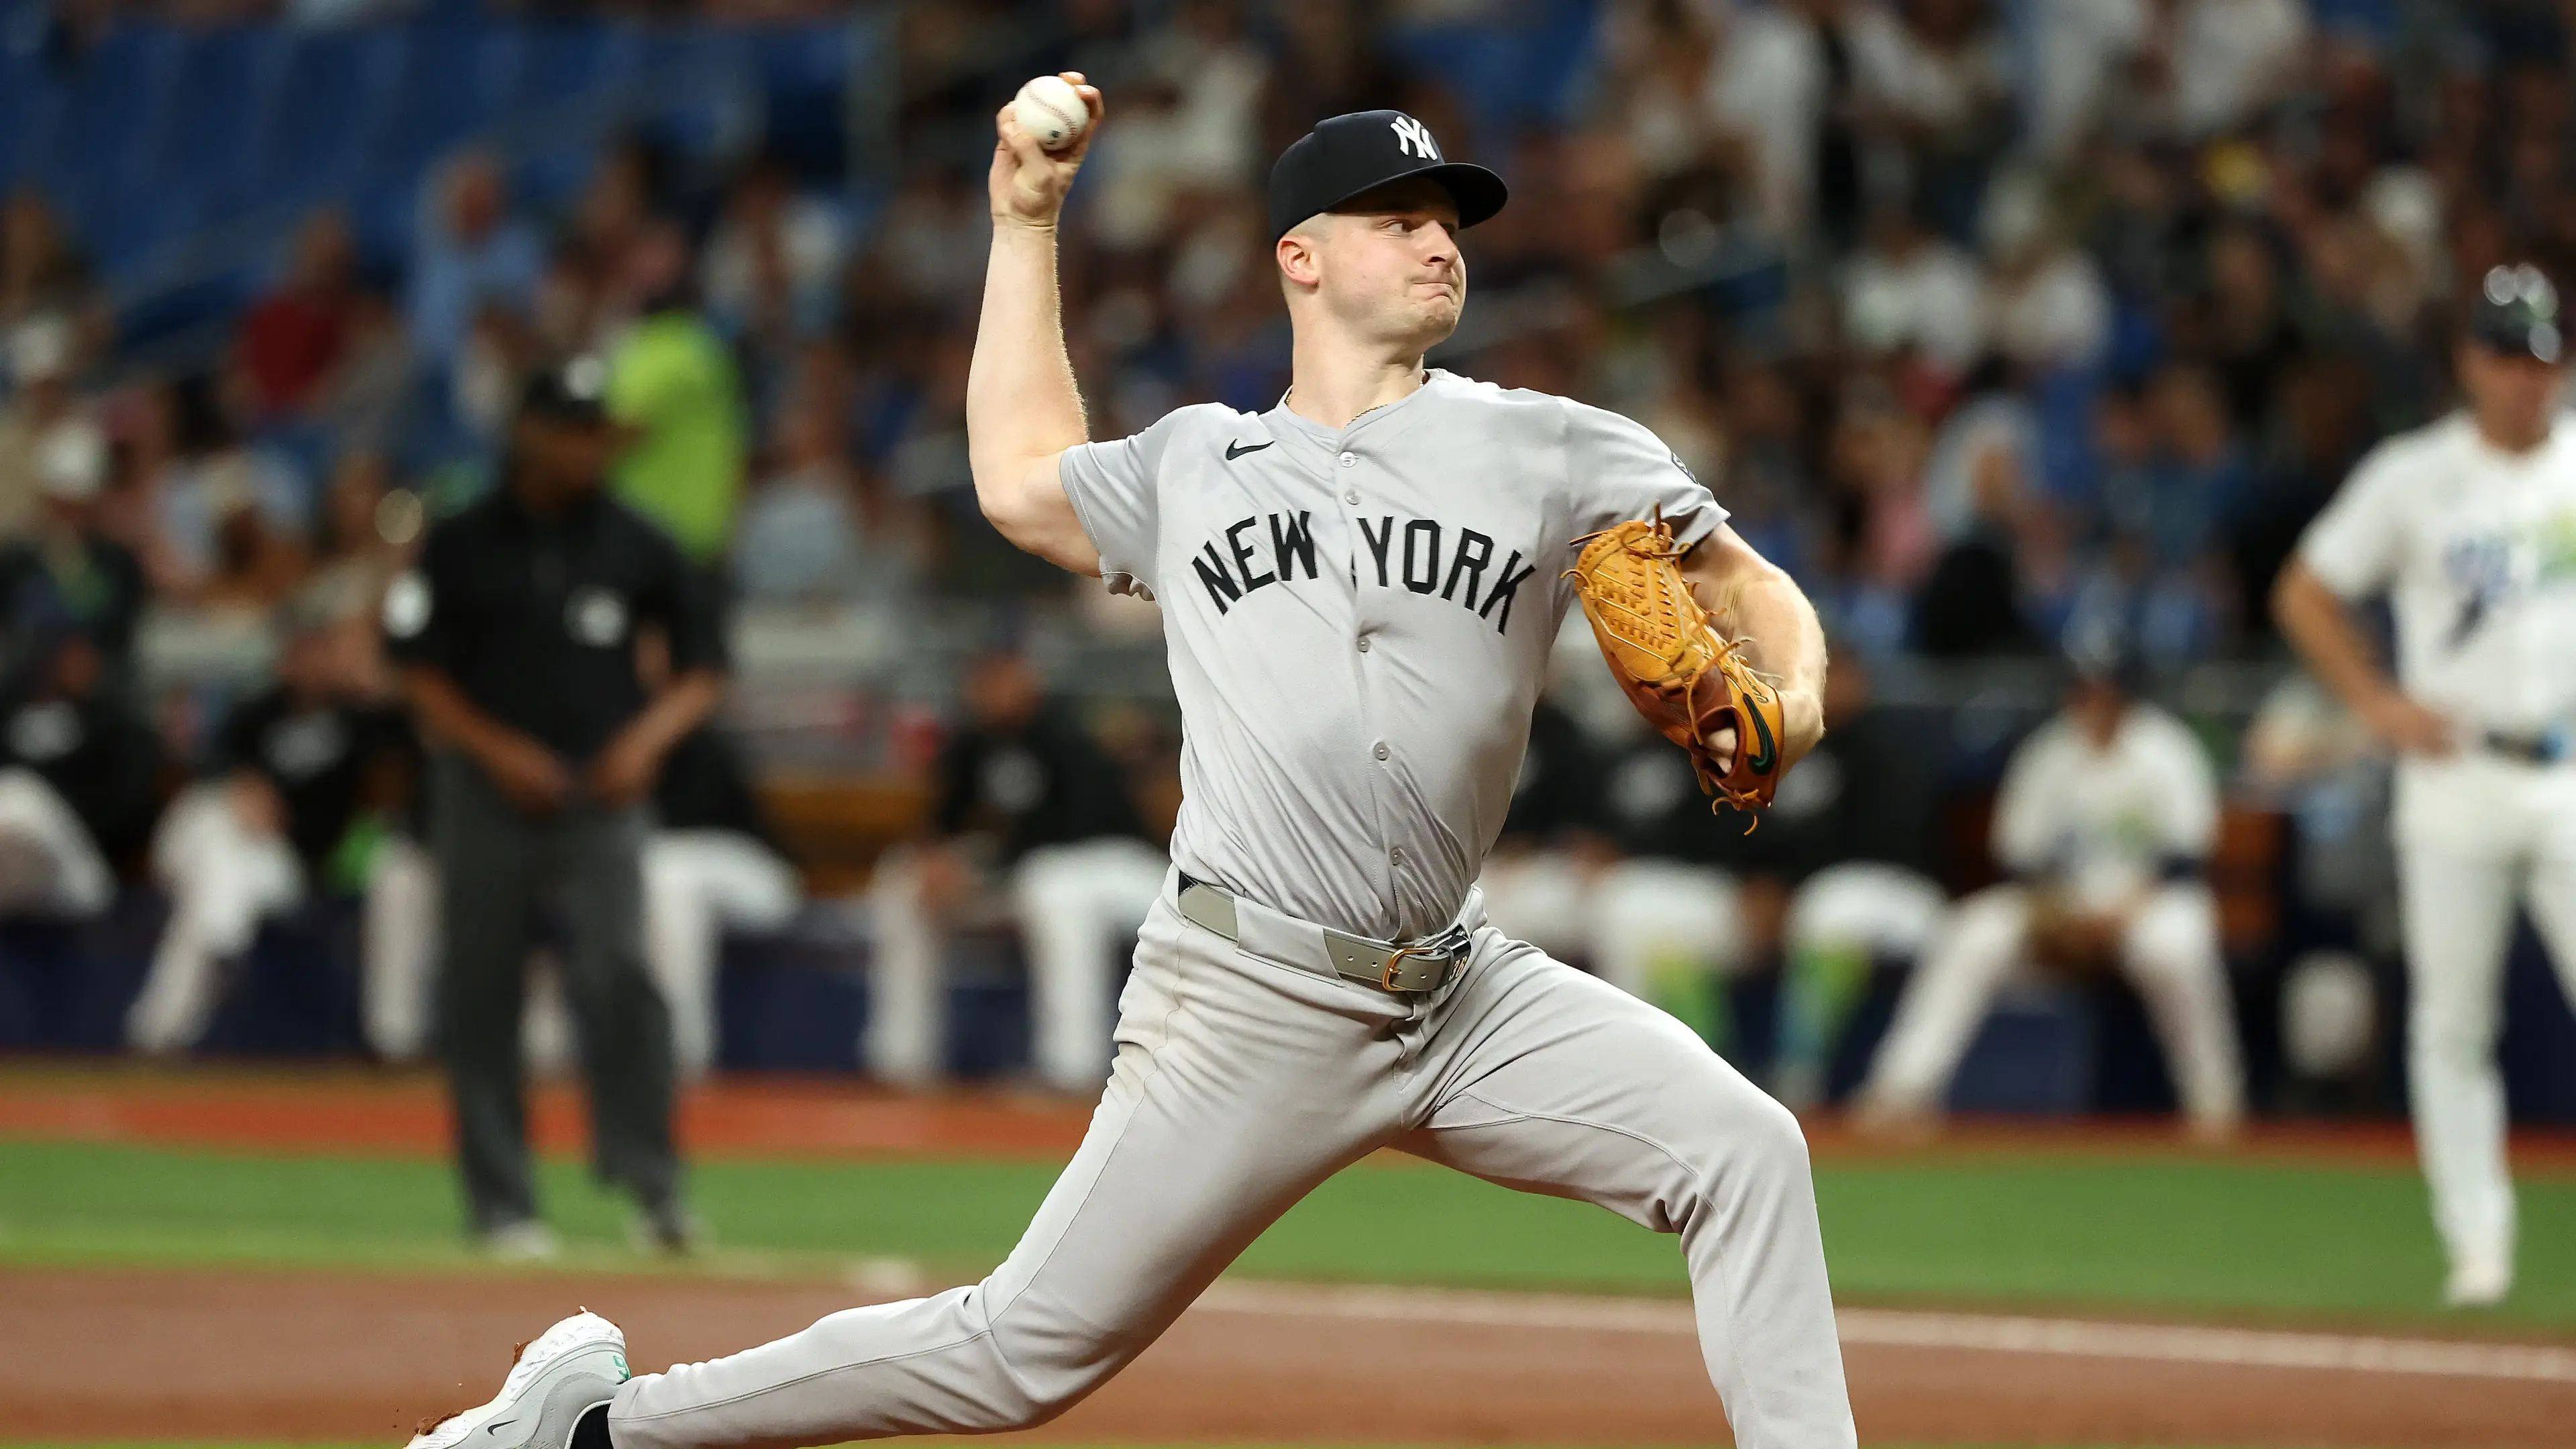 Yankees pitcher Clarke Schmidt (36) throws a pitch against the Tampa Bay Rays during the first inning at Tropicana Field. / Kim Klement Neitzel-USA TODAY Sports